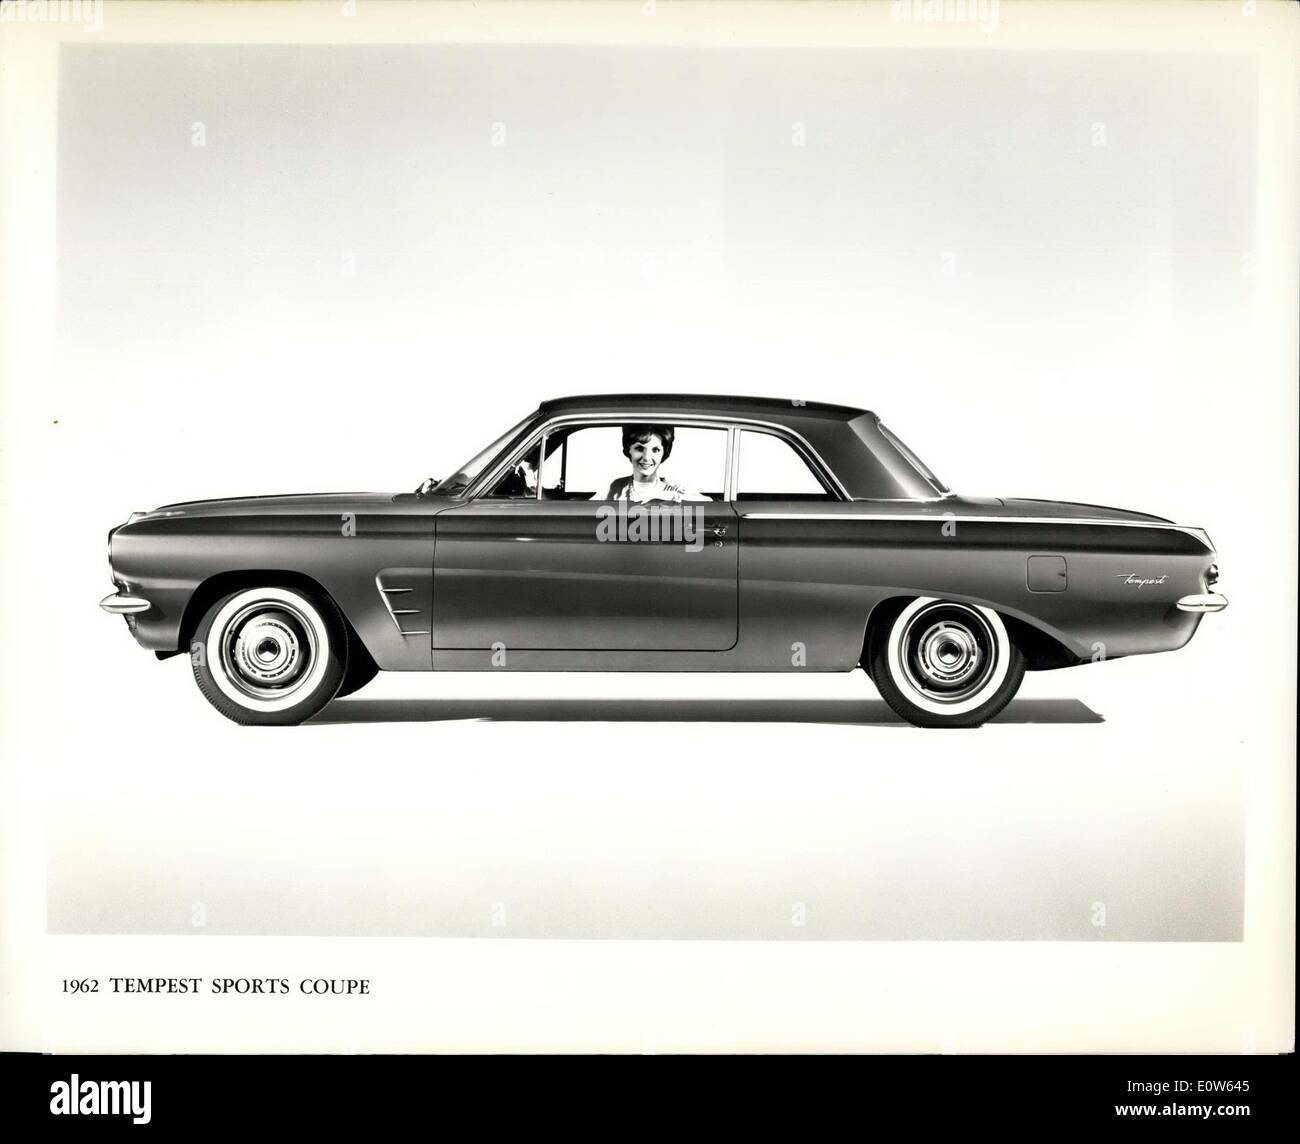 Sep. 13, 1961 - New Tempest two-door sports coup? for 1962 features new grille, new rear end styling, a smaller rear window and Stock Photo